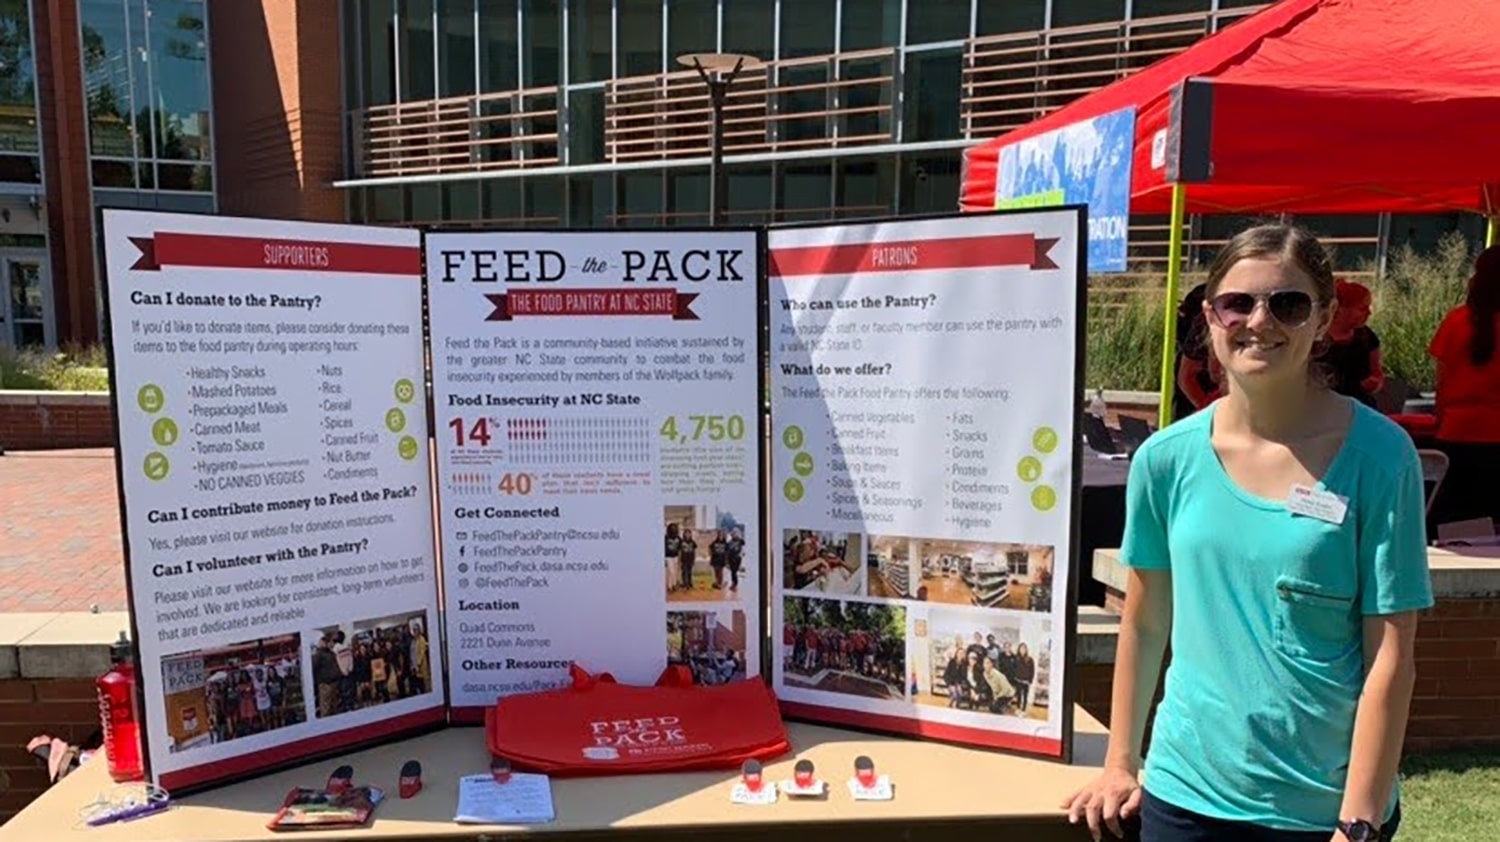 Rose Krebs standing next to a display about Feed the Pack on the Brickyard